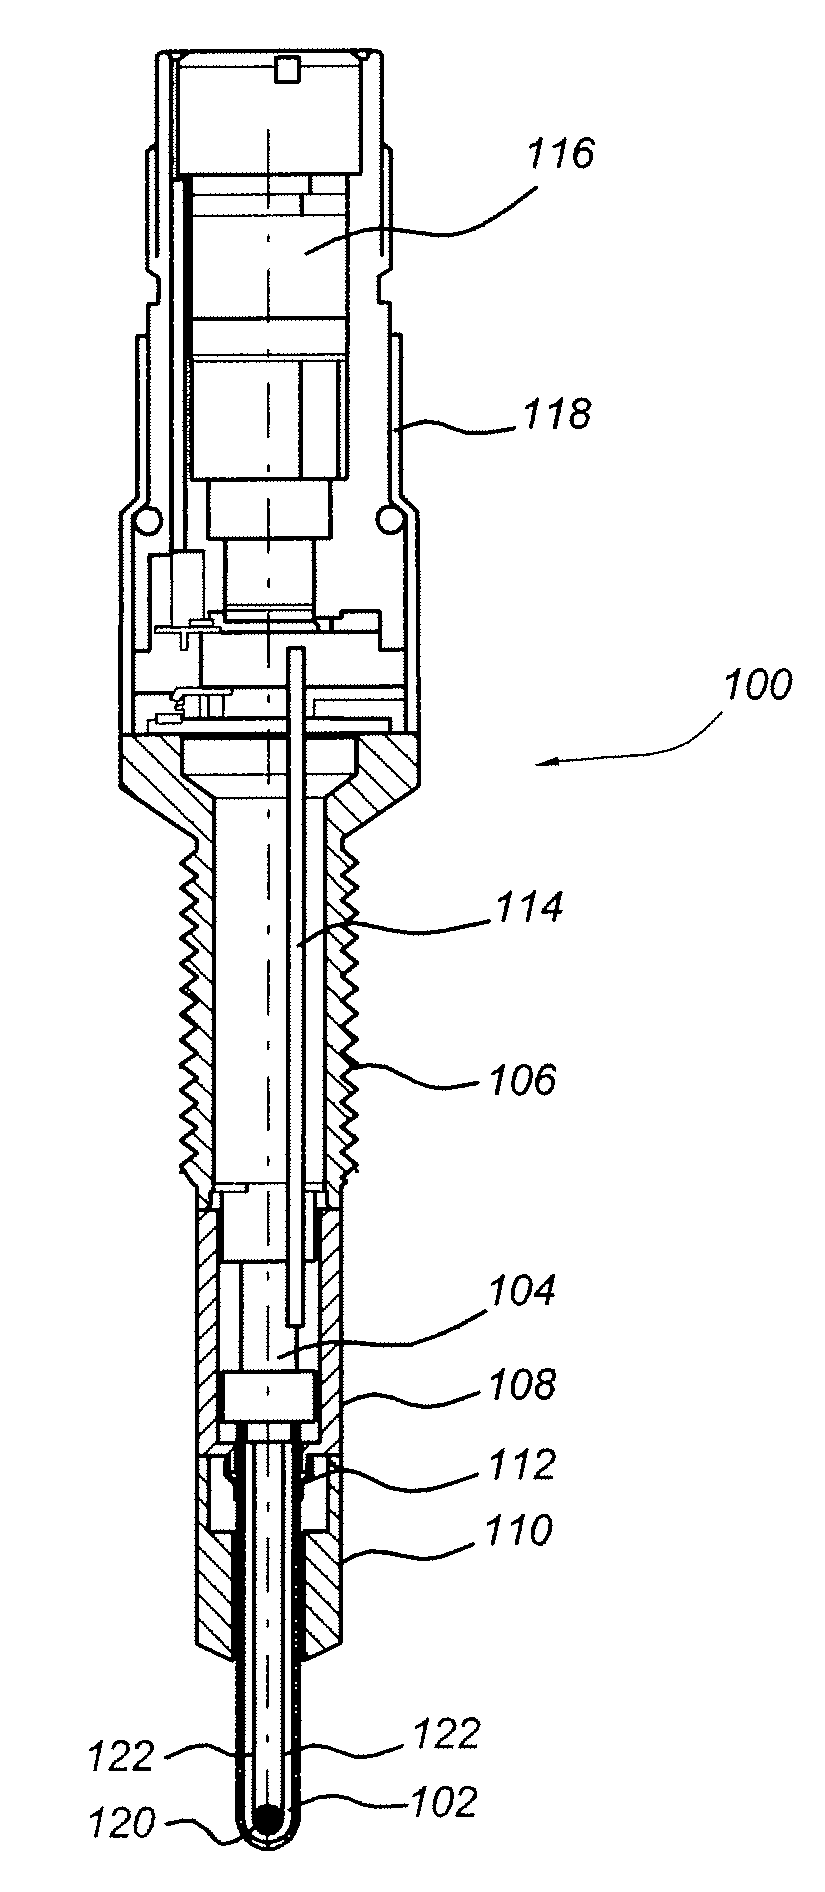 Piezoresistive Pressure-Measuring Plug for a Combustion Engine